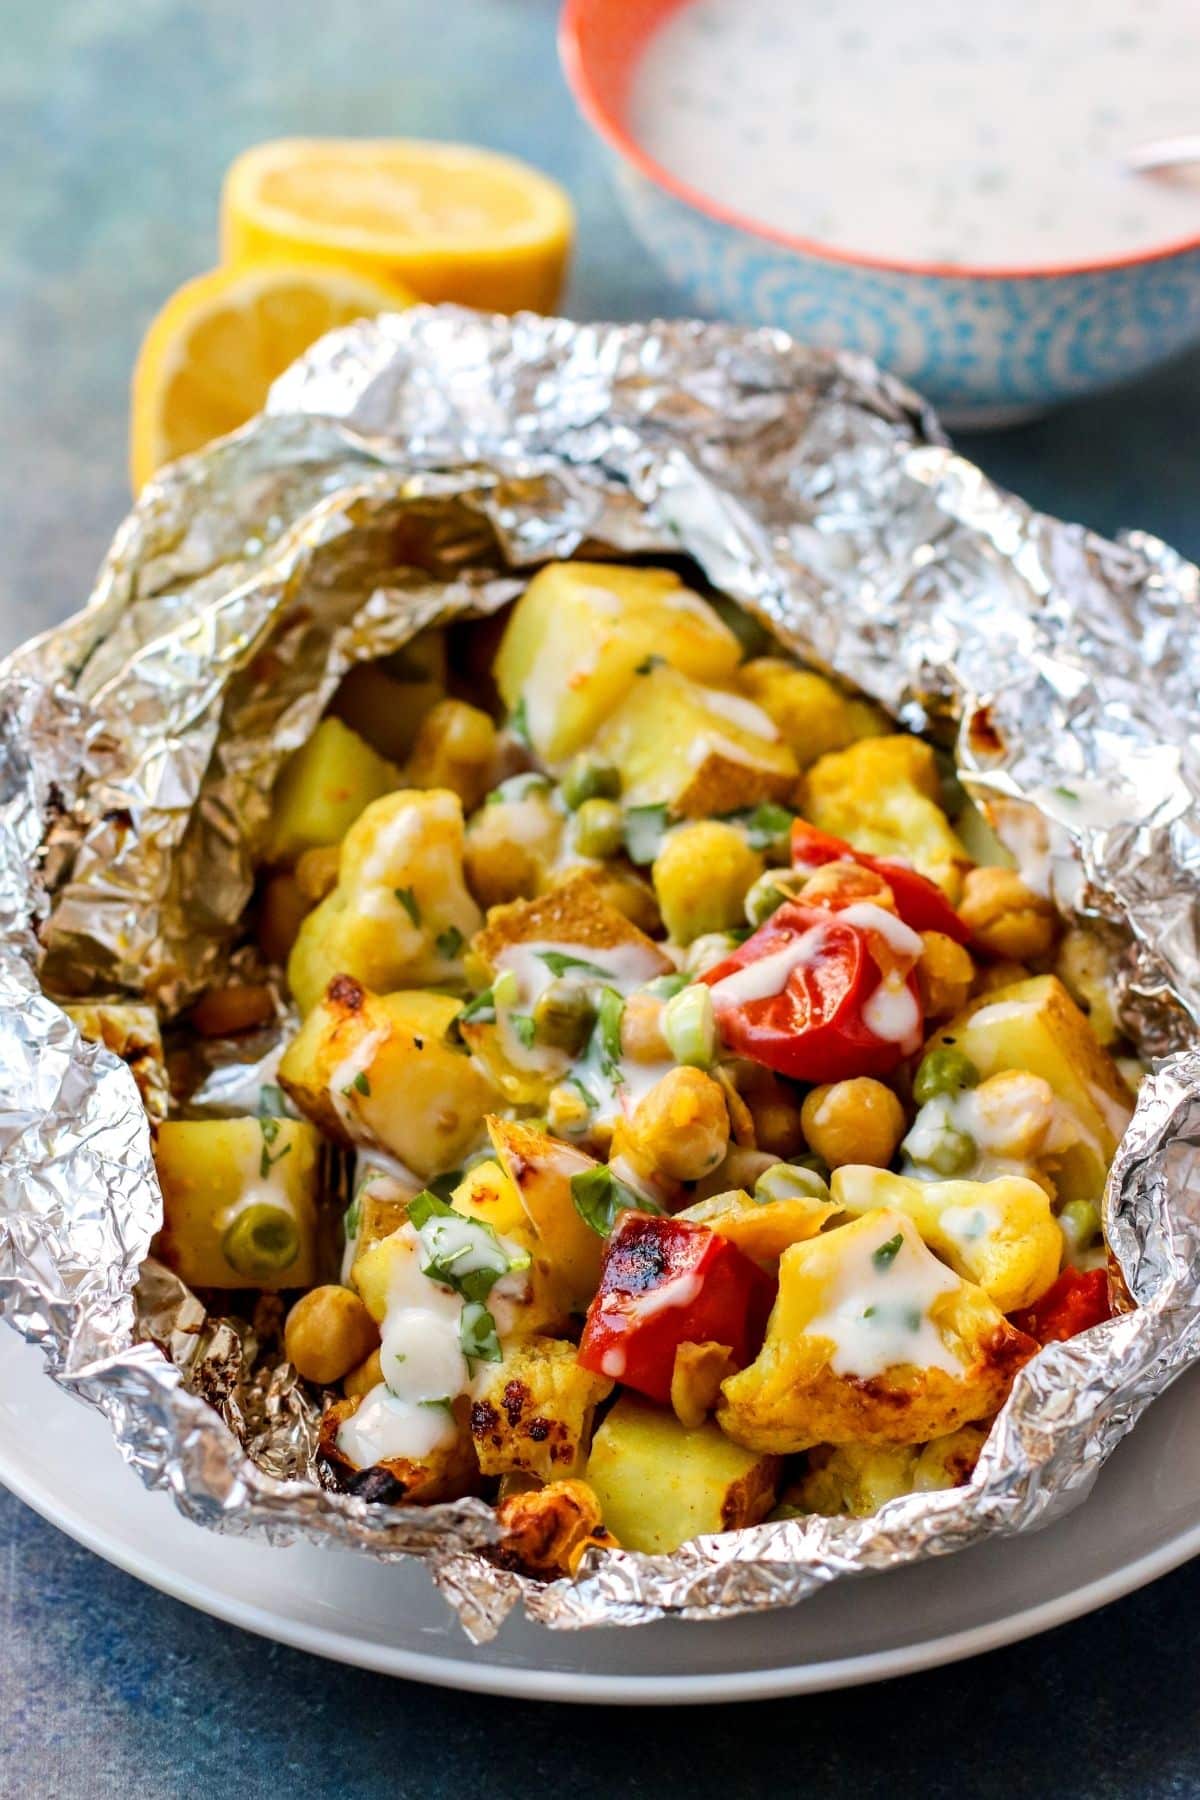 Foil packet containing potatoes, cauliflower, chickpeas, peas, and tomatoes open on a plate and drizzled with yogurt sauce